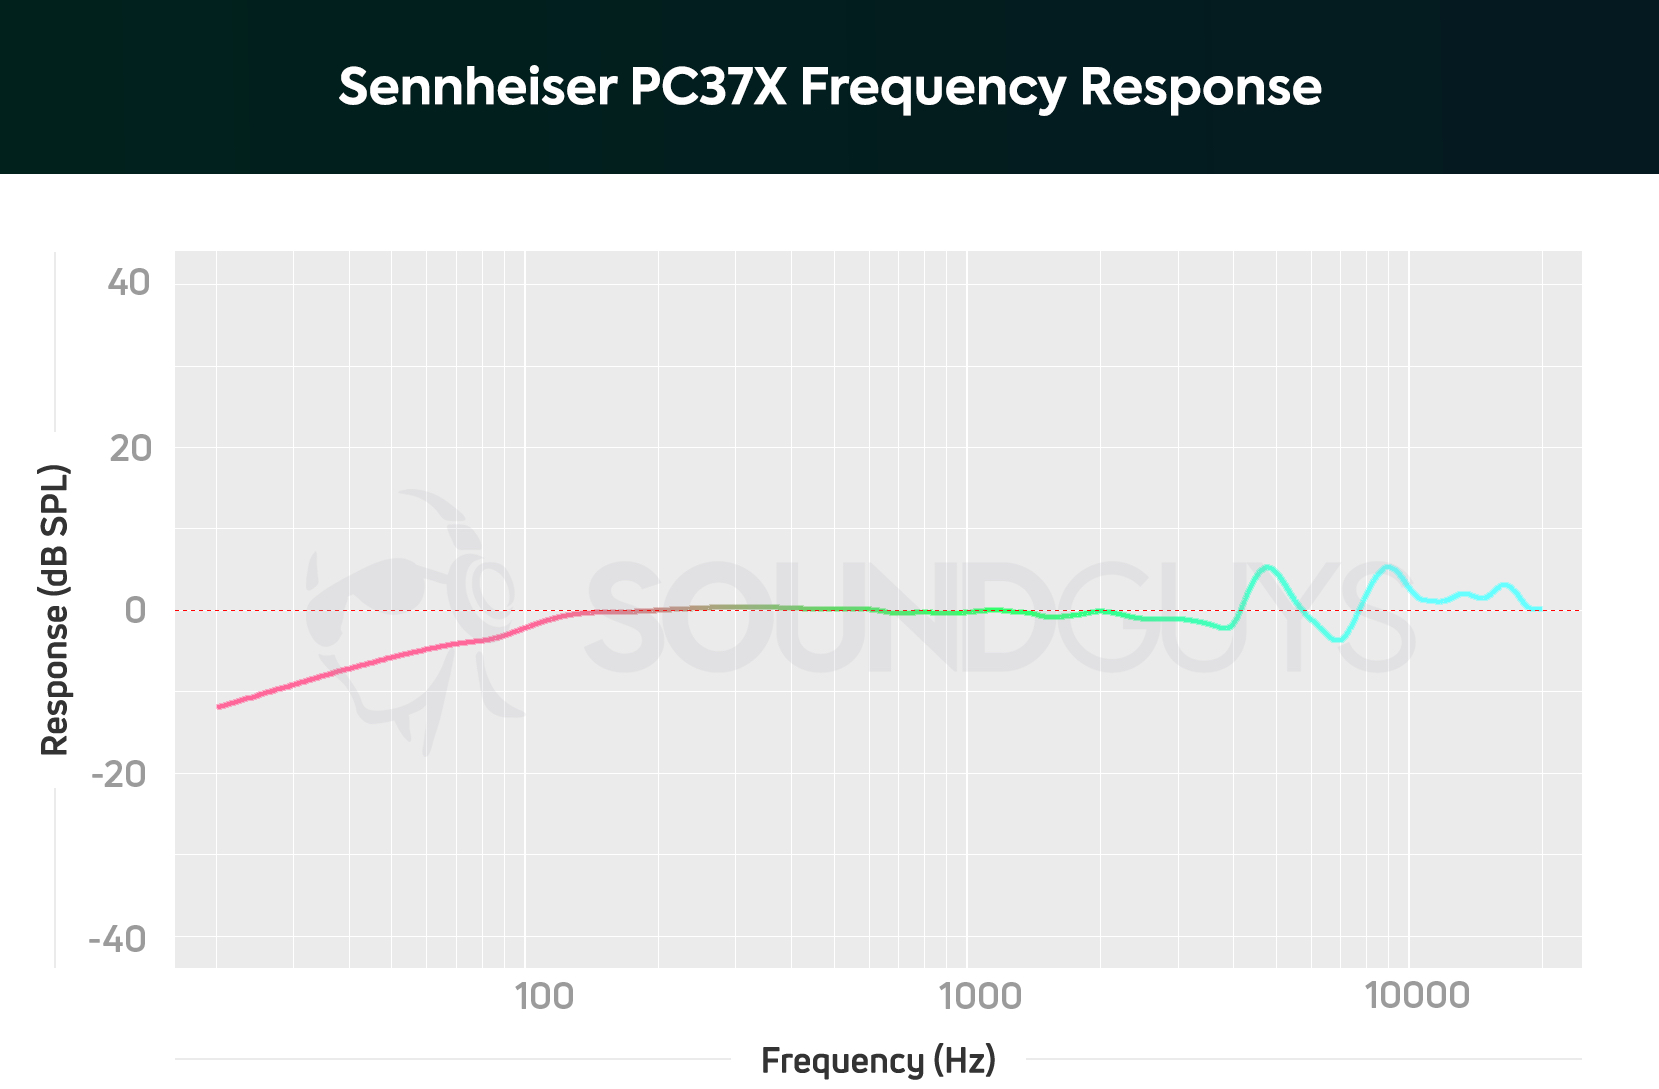 A frequency response chart for the Sennheiser PC37X gaming headset